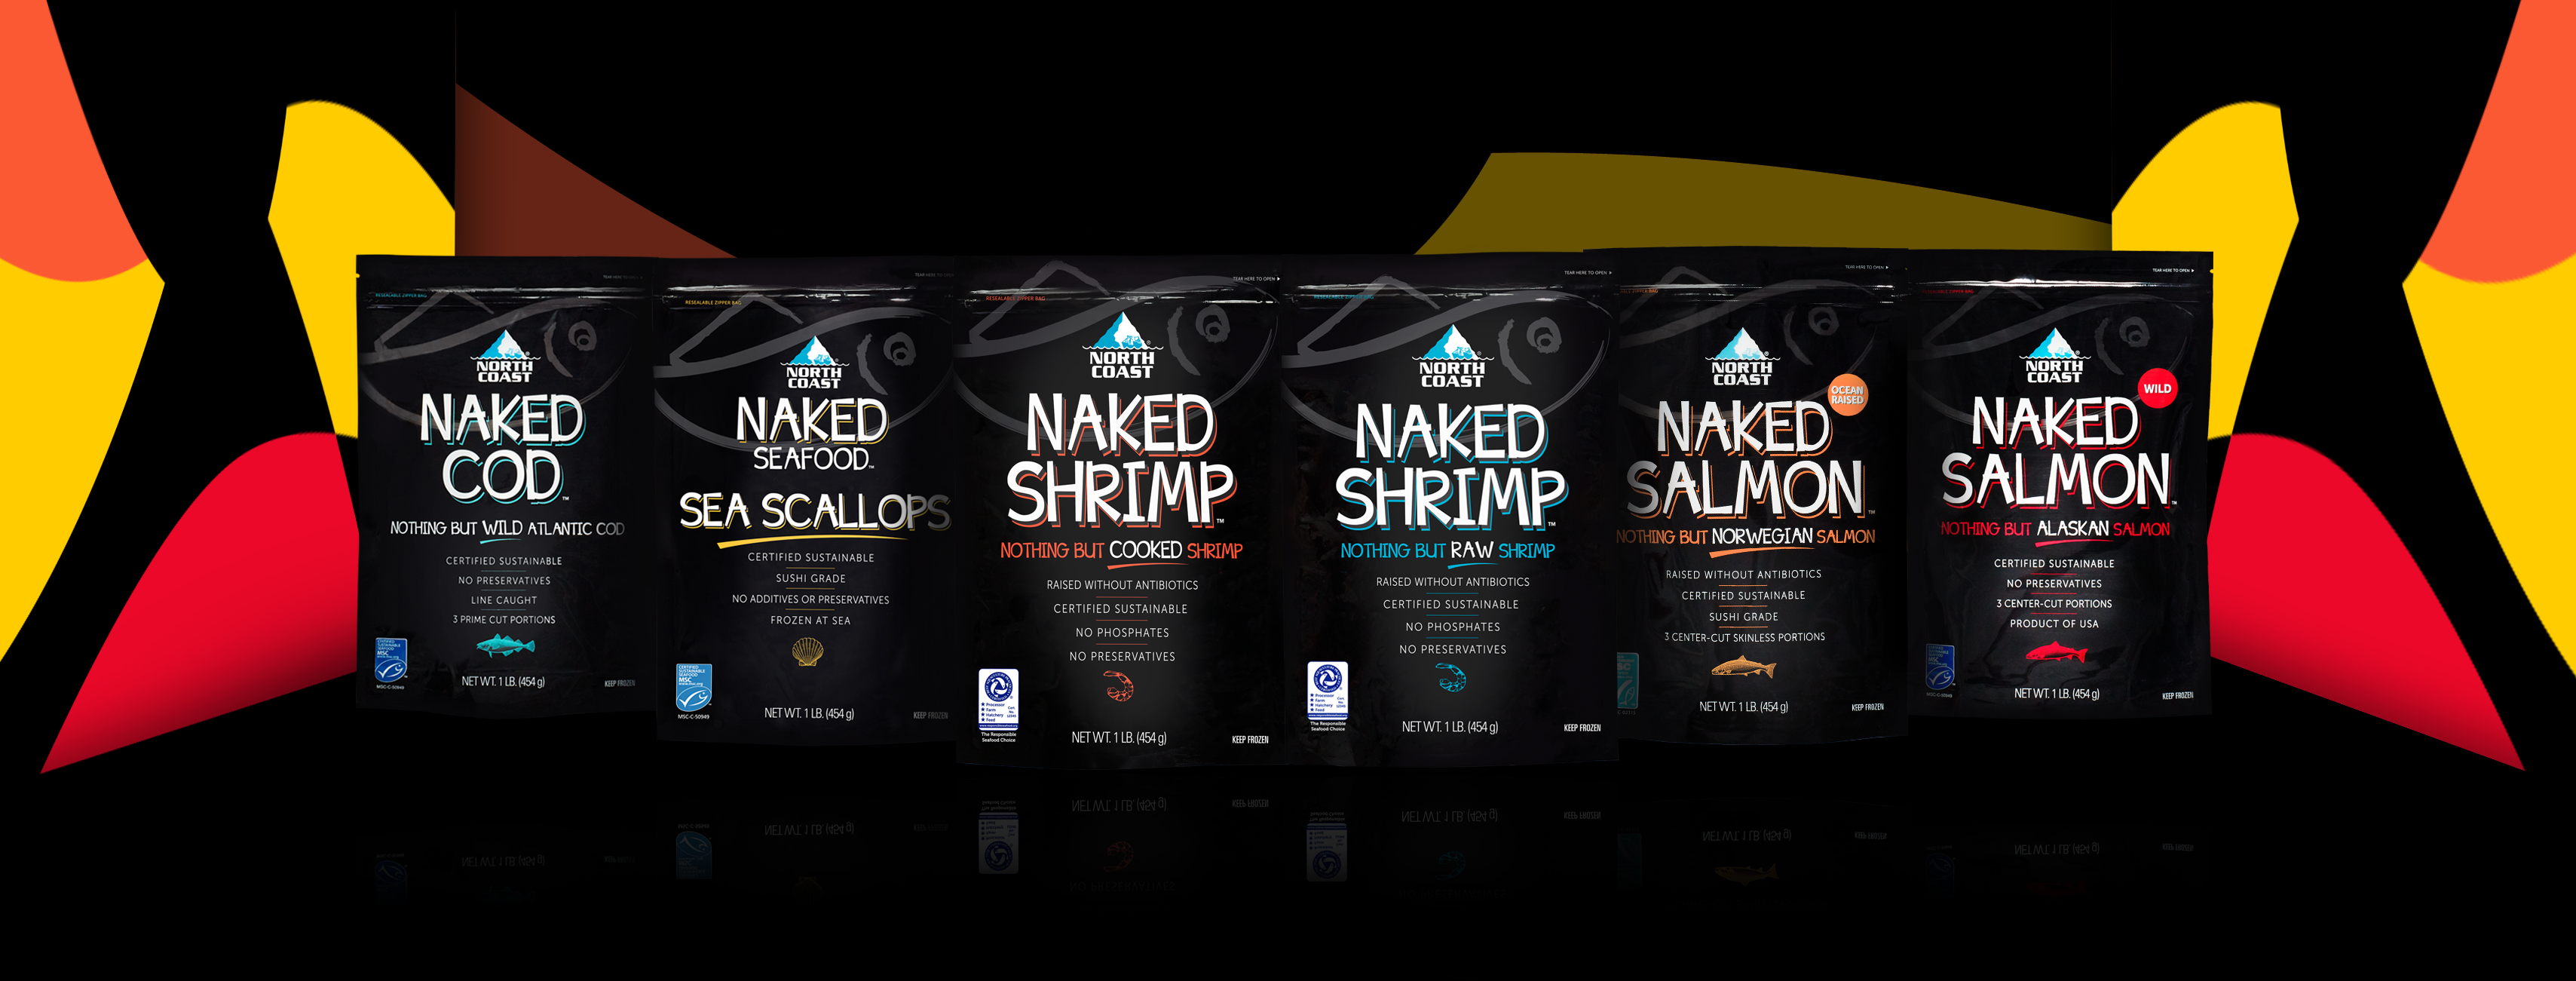 6 Naked Seafood bags lined up in a row